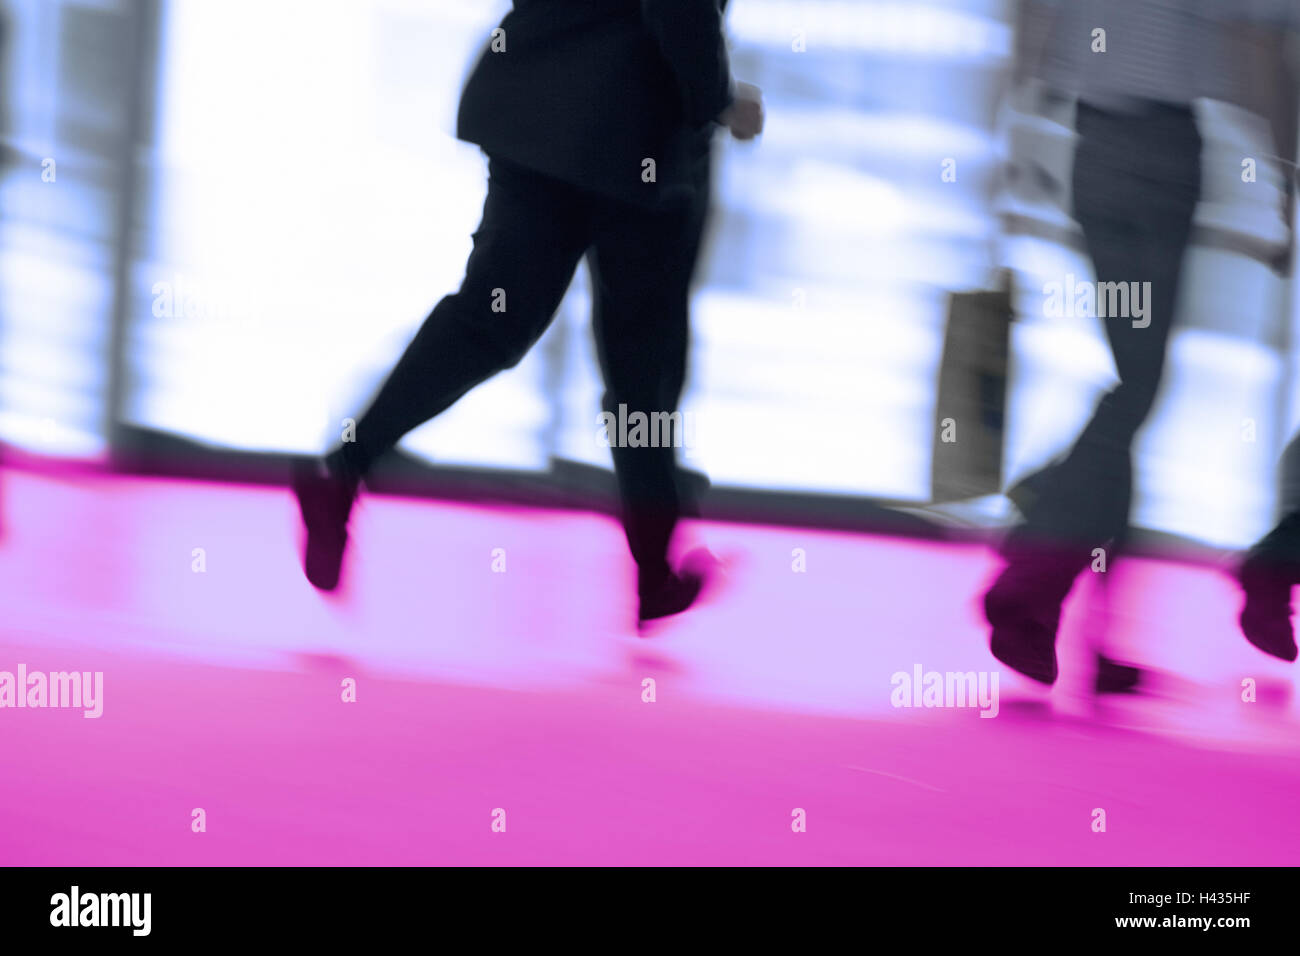 Goes hall, business people, back-opinion, detail, legs series people people businessmen, men, two, movement, locomotion, rush, Hektik, stress, time-pressure, date-pressure, dates, business, floor, pink, concept, unrecognized, anonymity, Stock Photo